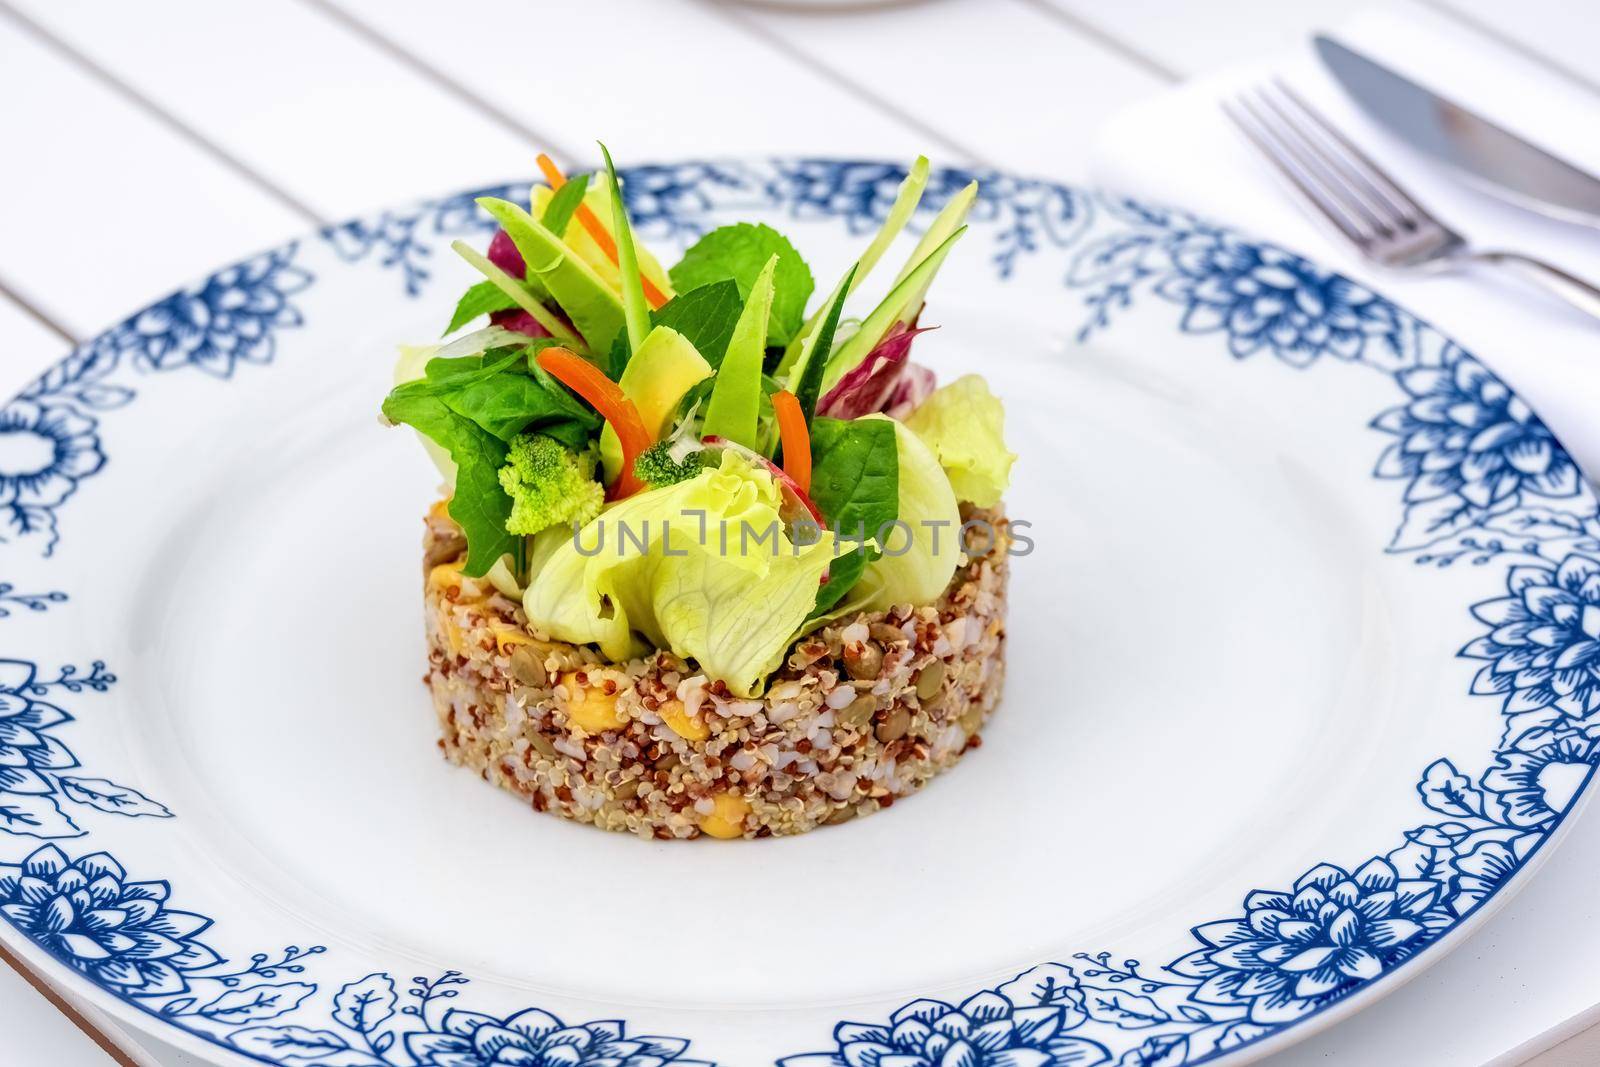 Quinoa salad with avocado, carrot, chickpeas and fresh greens by Sonat